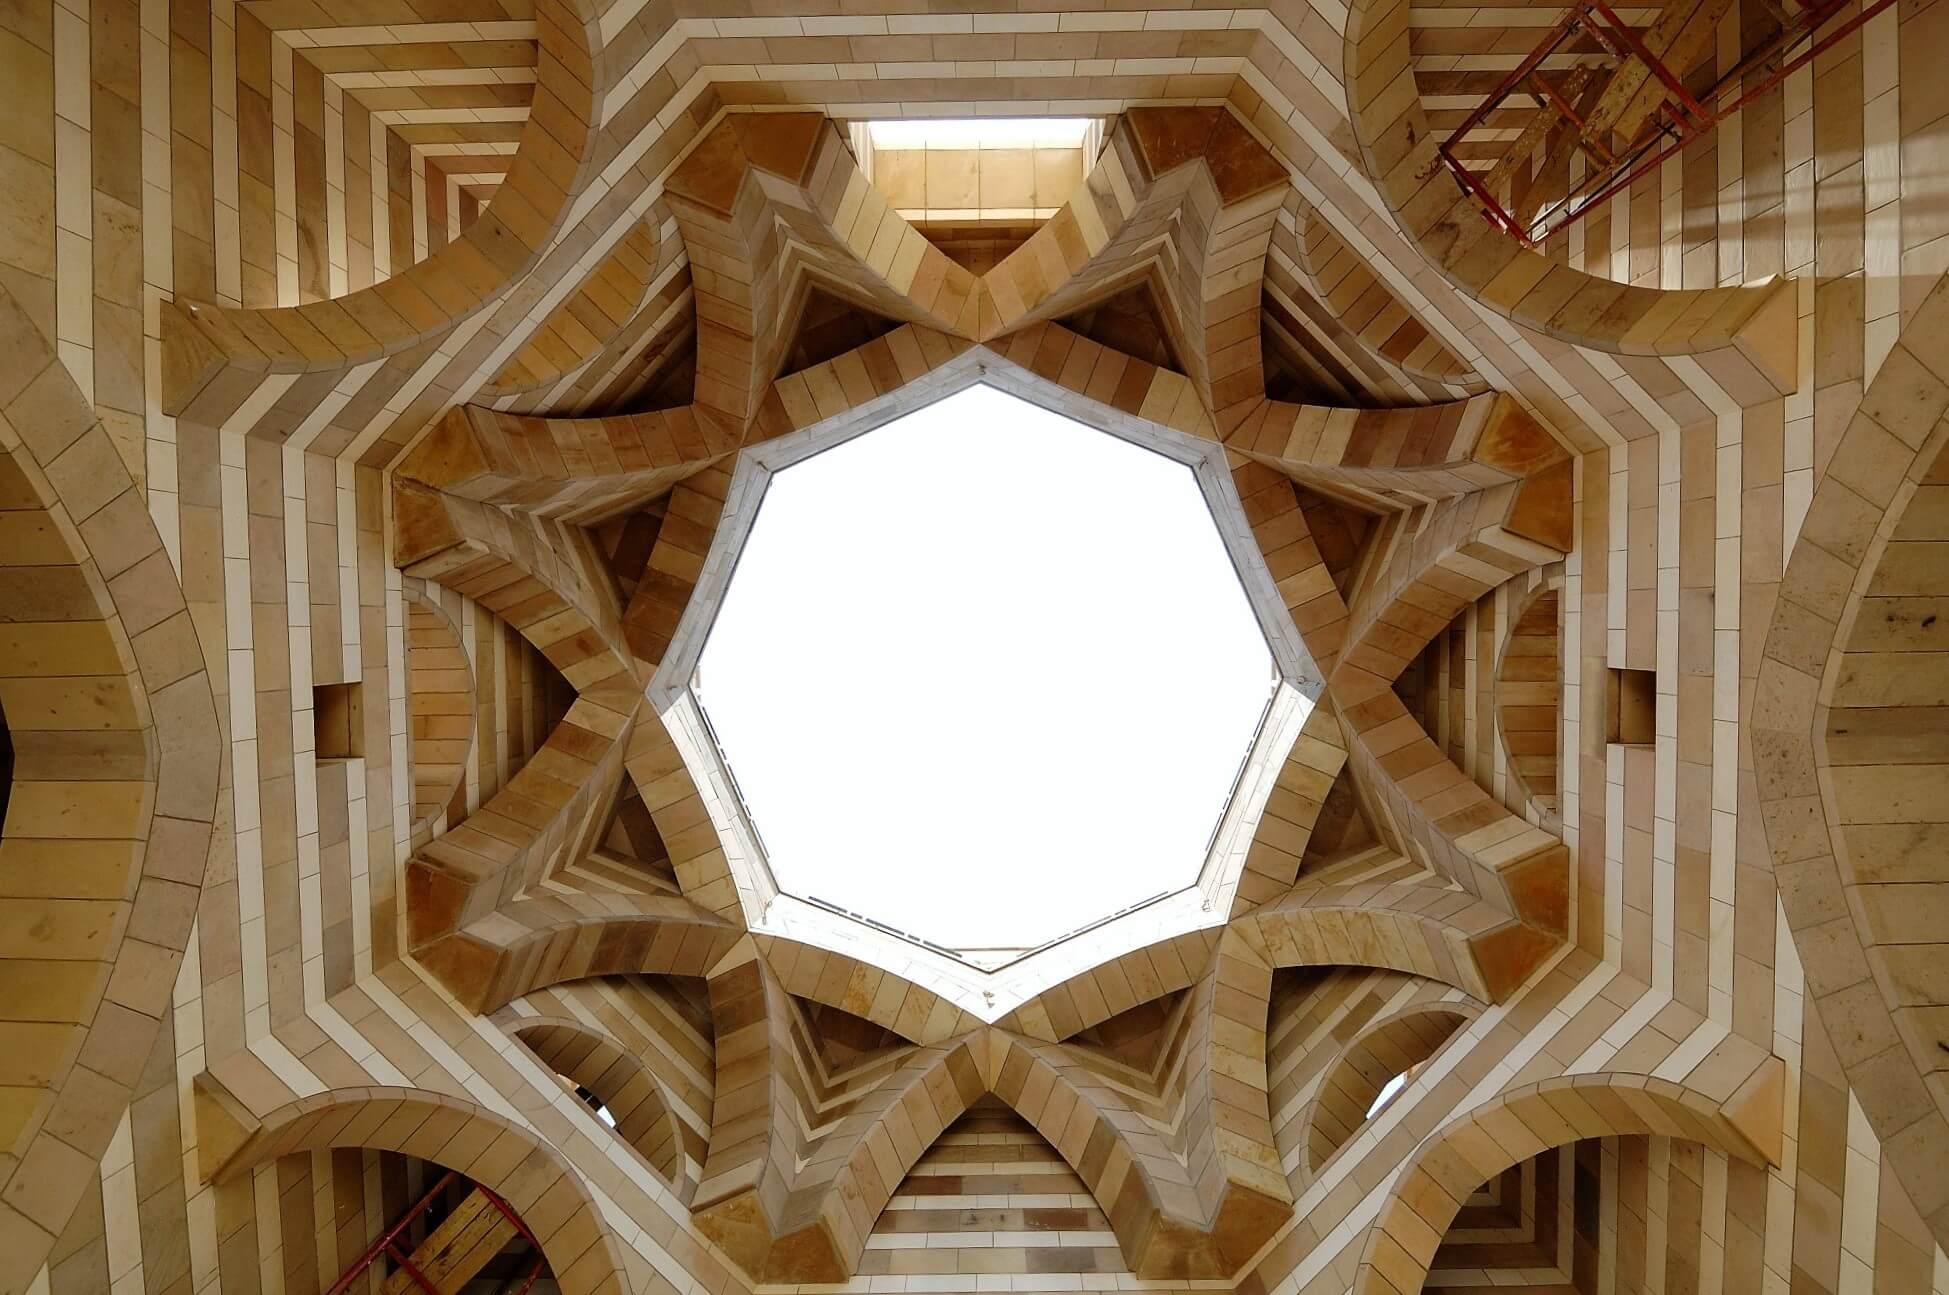 Architecture of featured ceiling